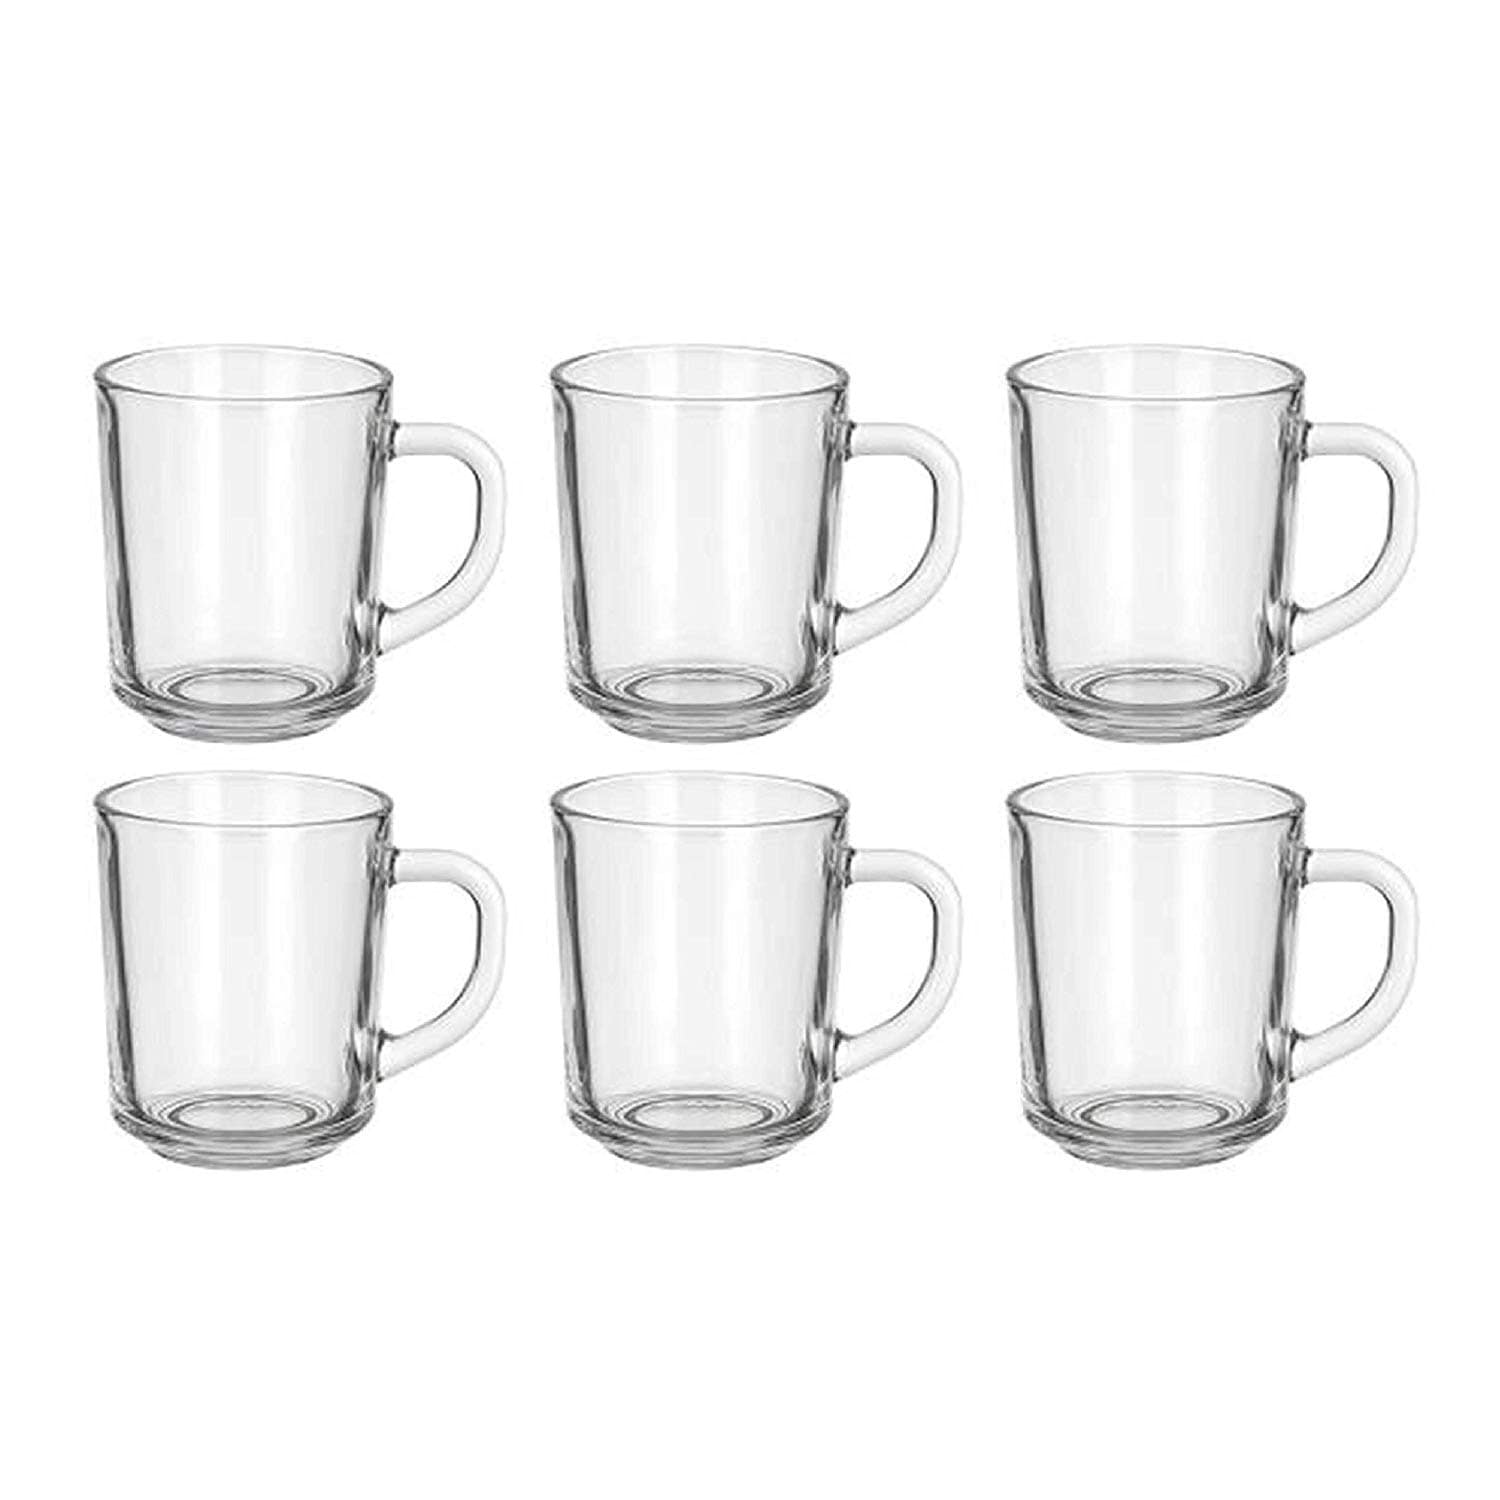 https://ak1.ostkcdn.com/images/products/30259630/Caf-Glass-Coffee-Mugs-Clear-8-oz-Great-For-Tea-Coffee-Juice-Mulled-Wine-And-More-c34c8724-c9d9-4962-8f9a-75336f934fc4.jpg